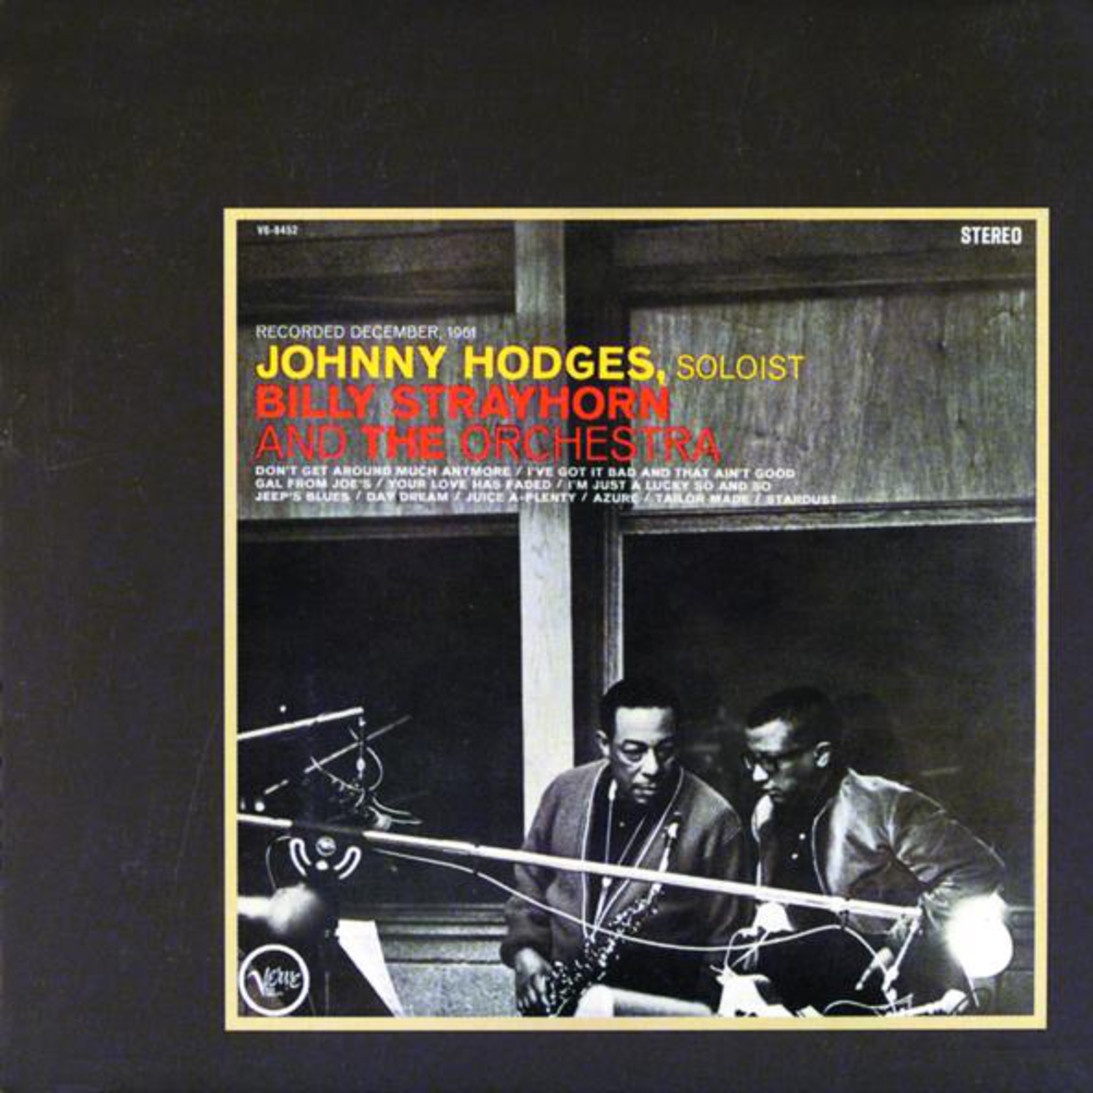 Johnny Hodges with Billy Strayhorn and the Orchestra